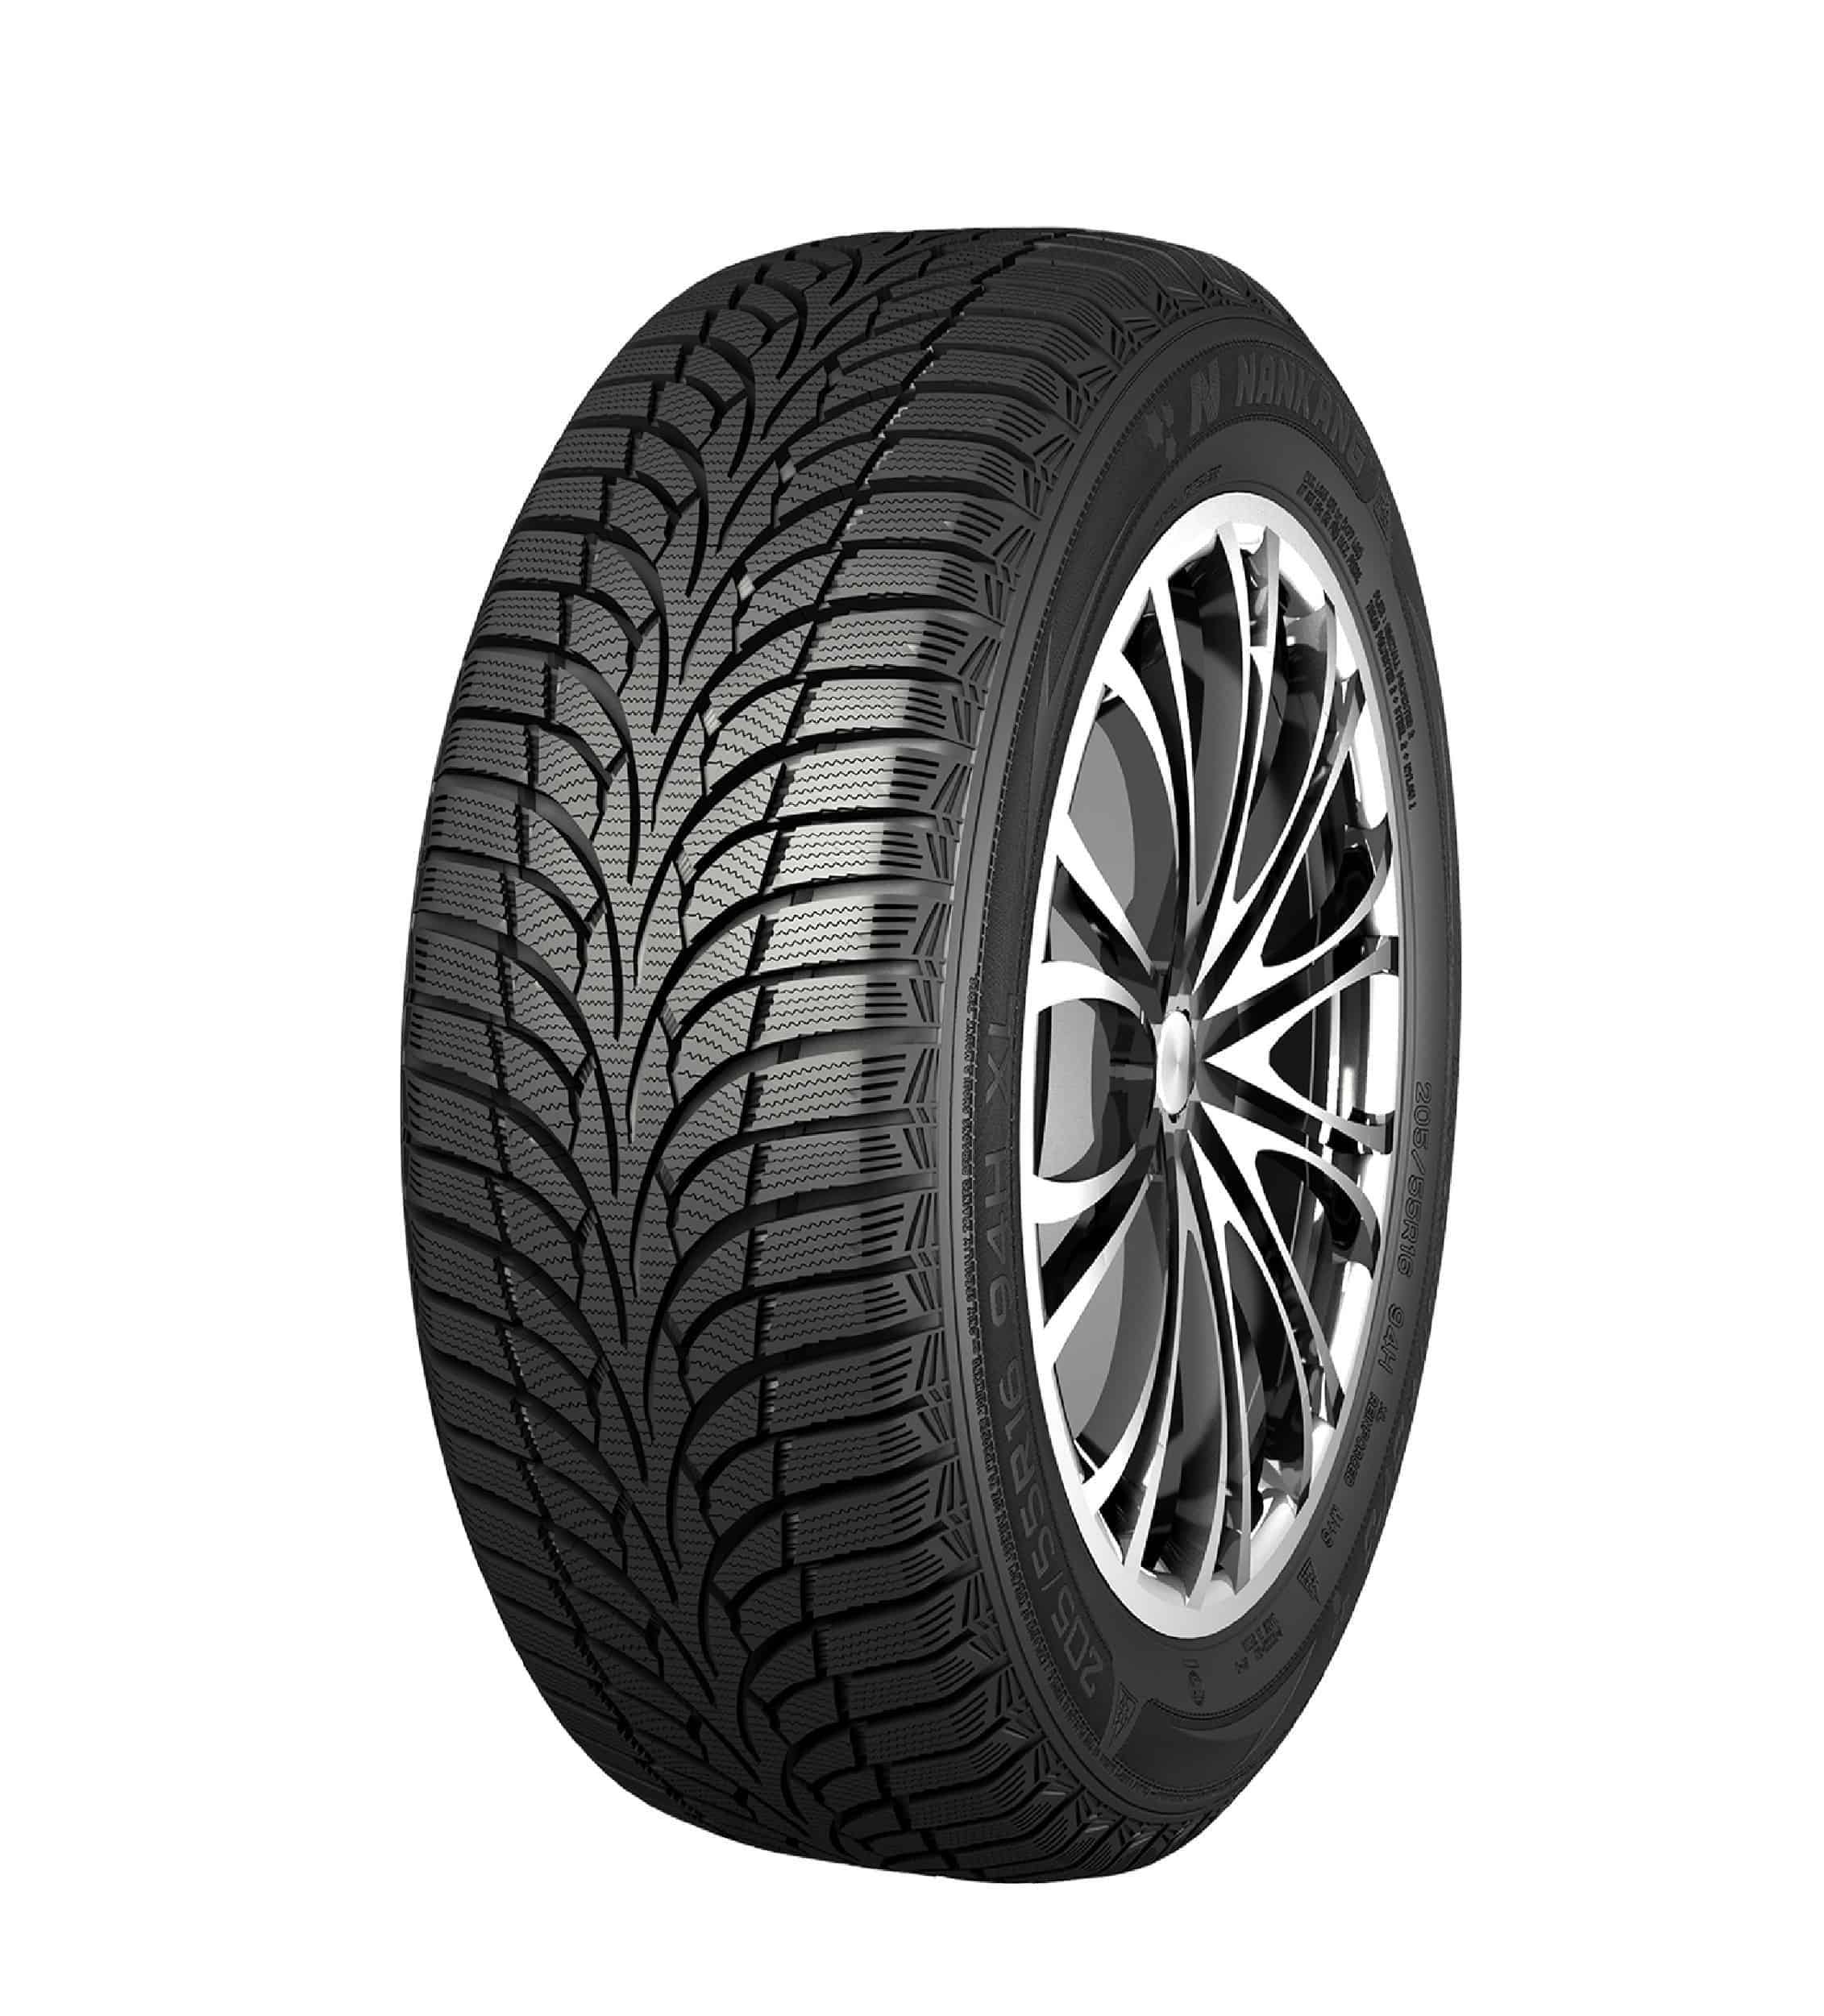 Gomme Nuove Nankang 195/50 R15 86H Winter Activa SV-3 XL M+S pneumatici nuovi Invernale